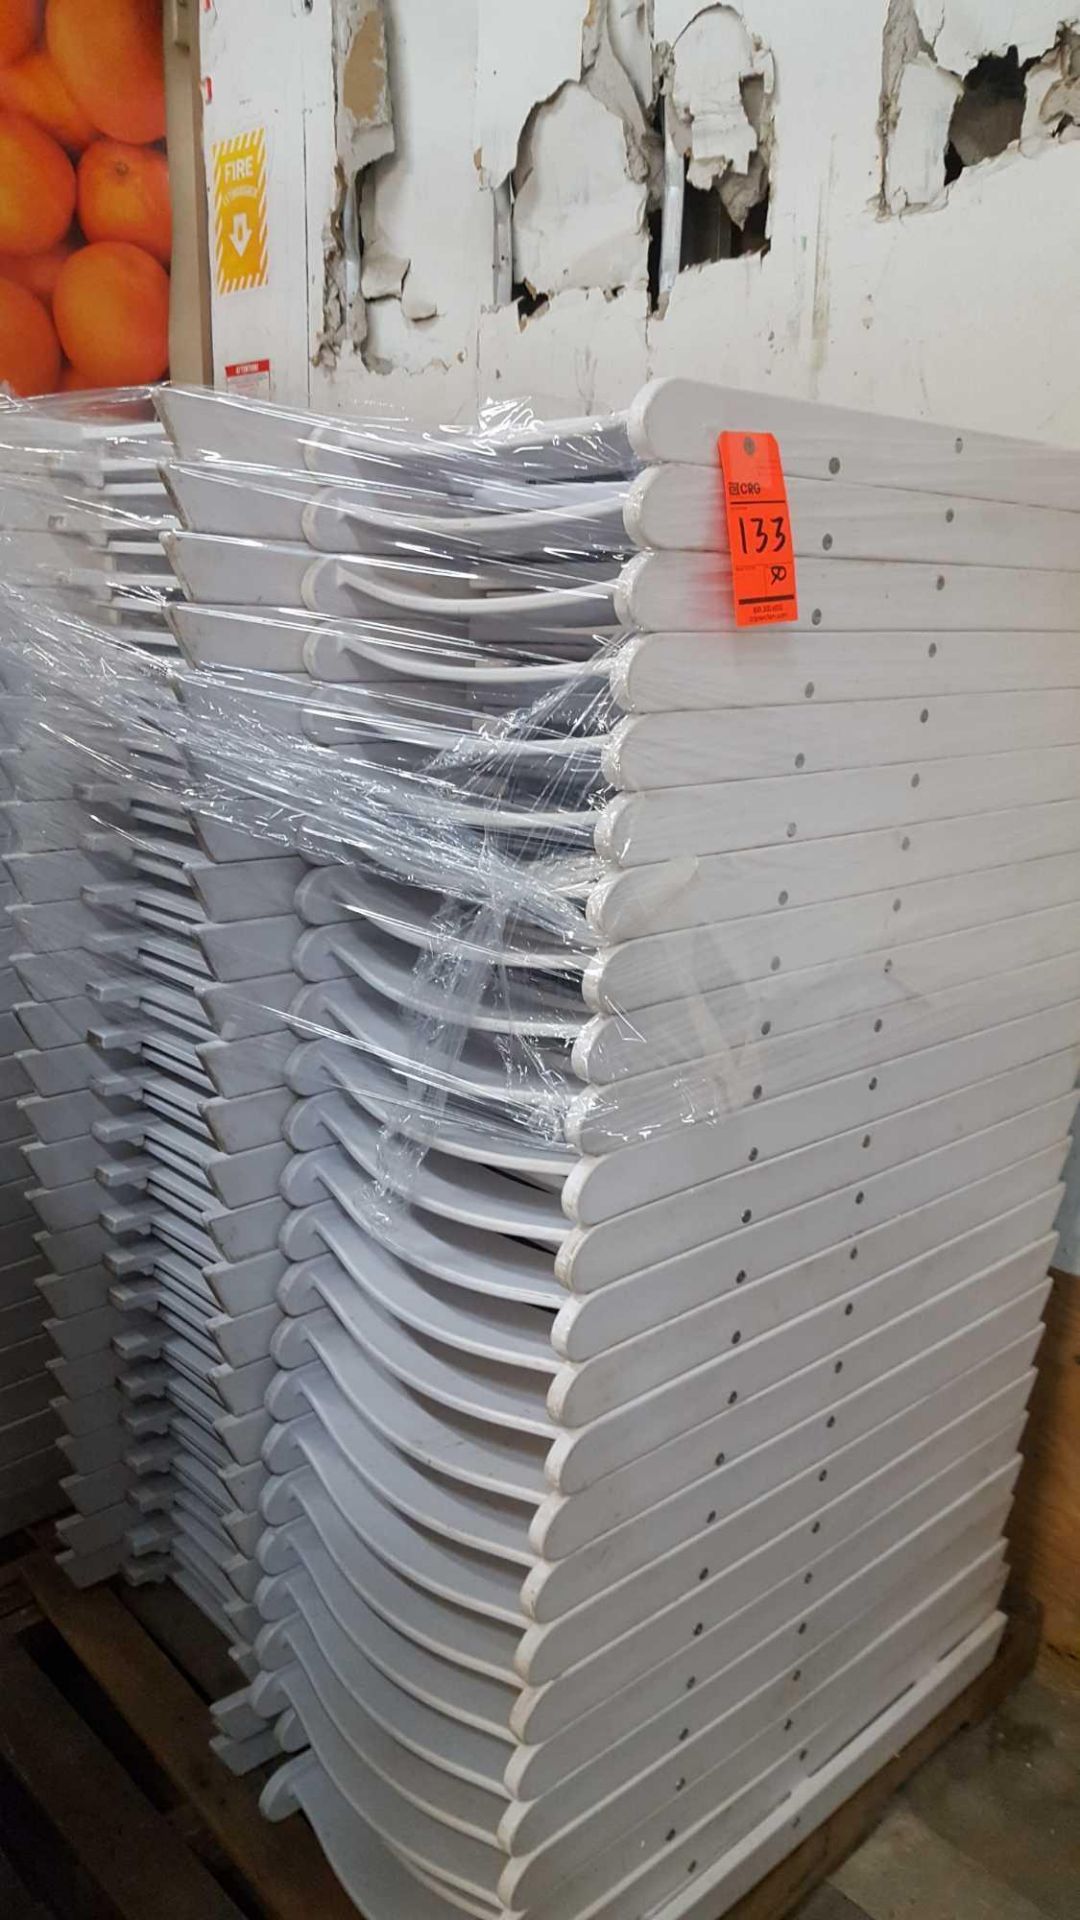 Lot of white folding resin chairs on a pallet